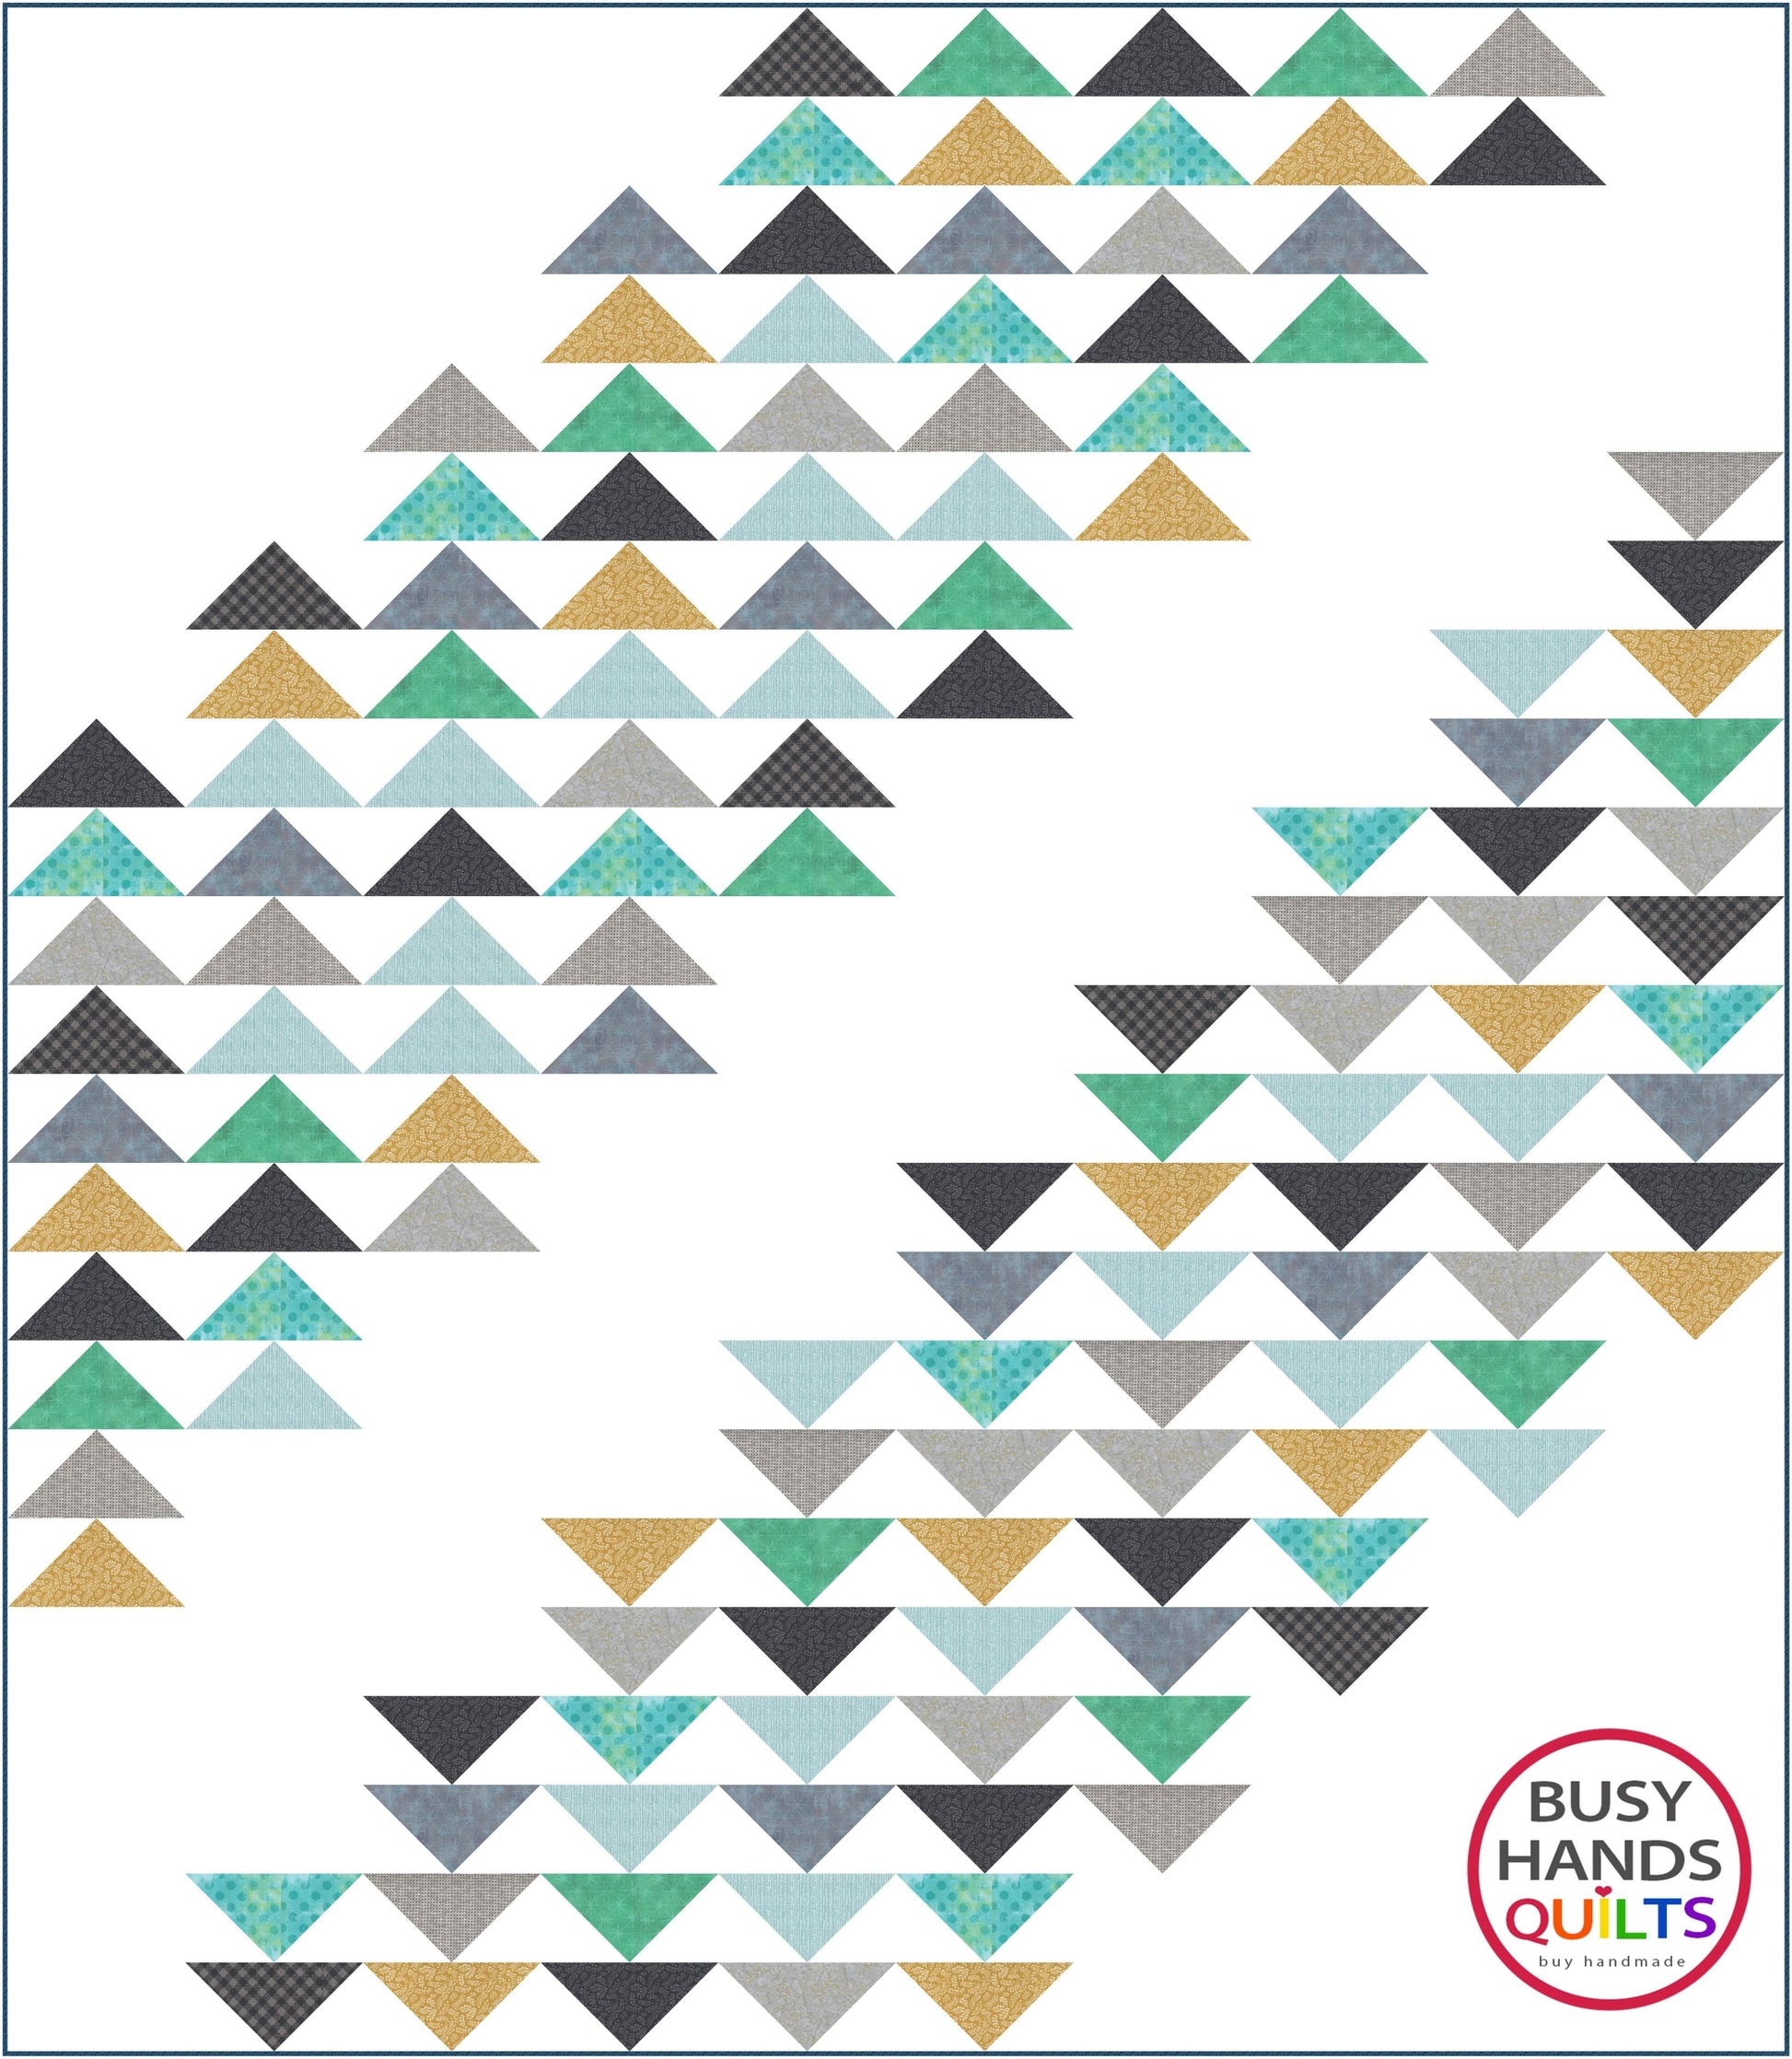 Formation Quilt Pattern PRINTED Busy Hands Quilts {$price}